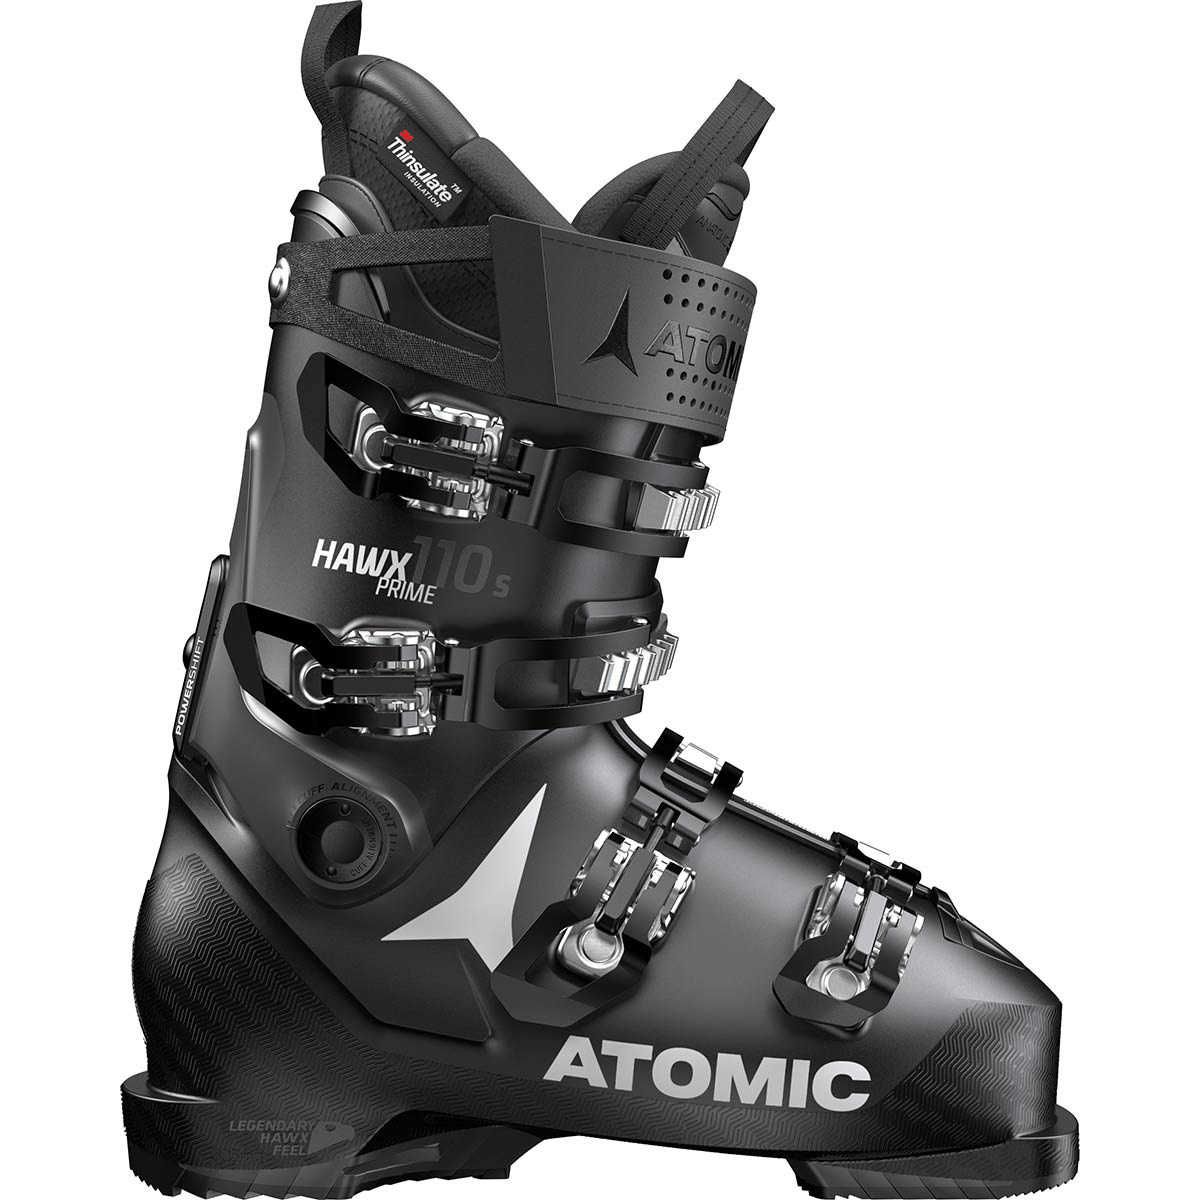 Chaussures ATOMIC HAWX PRIME 110 S black anthracite 2019